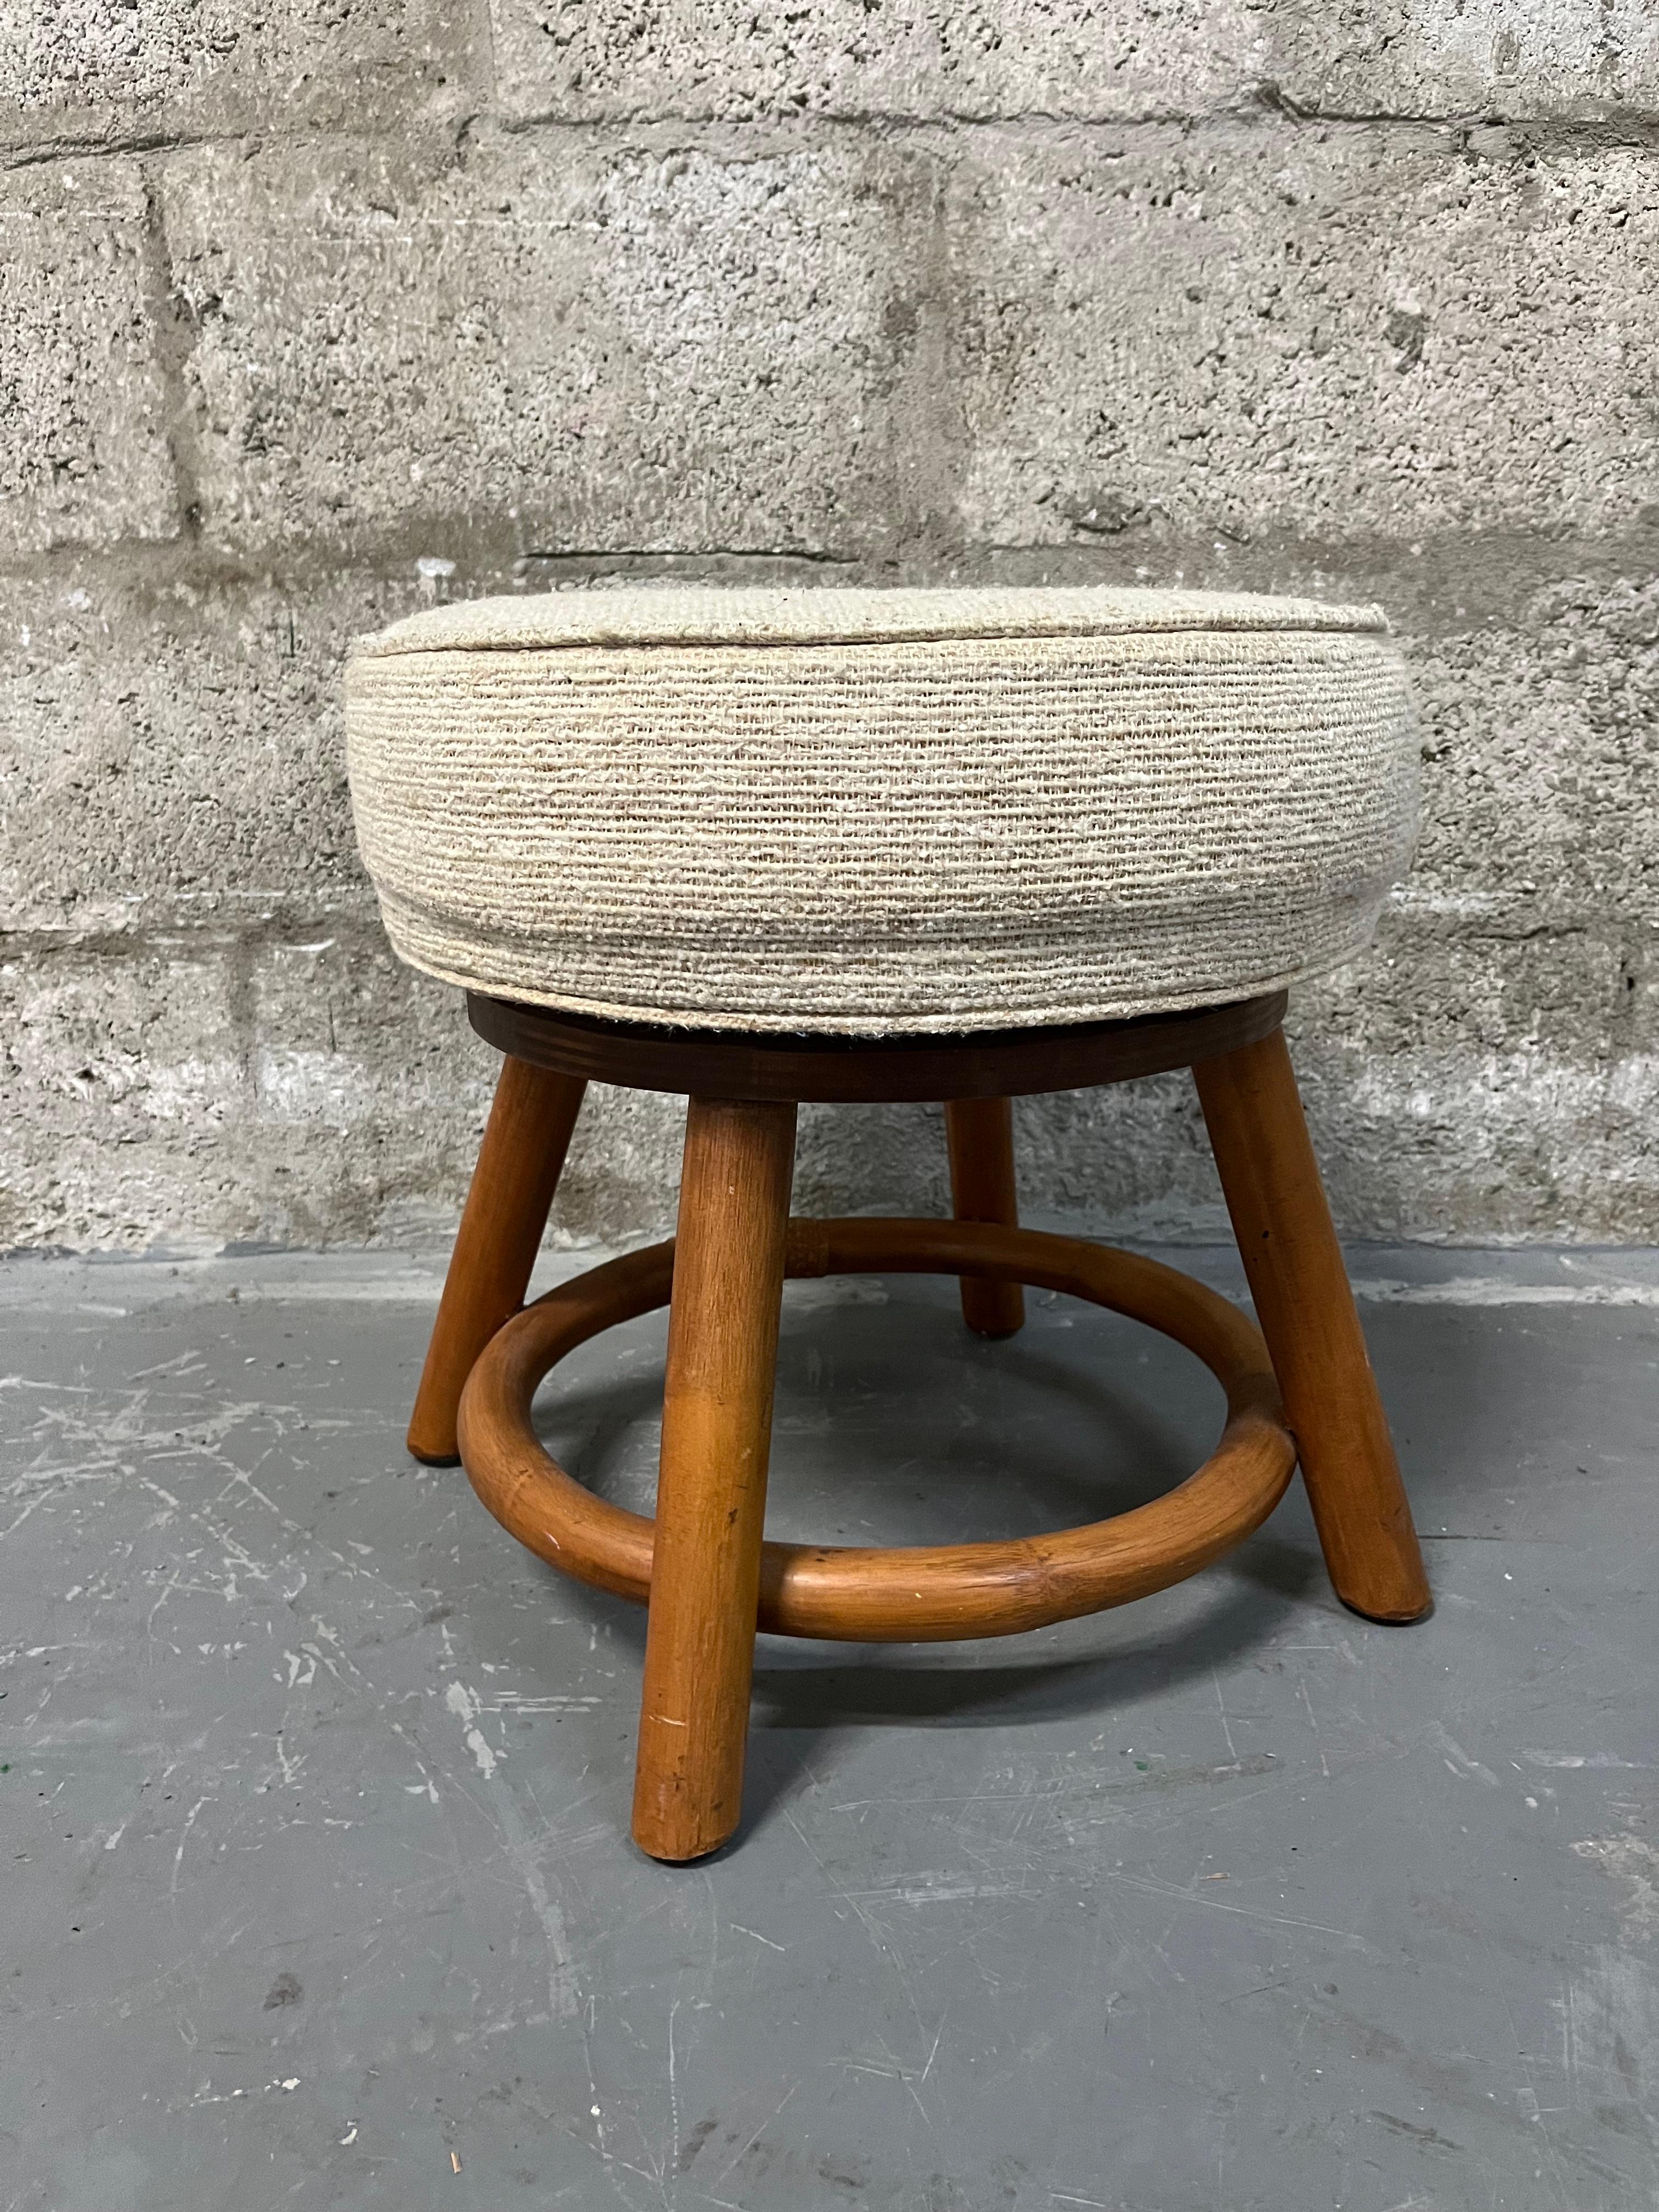 Late 20th Century Bamboo Rattan Wicker Swivel Footstool in the Paul Frankl's Style. Circa 1970s  For Sale